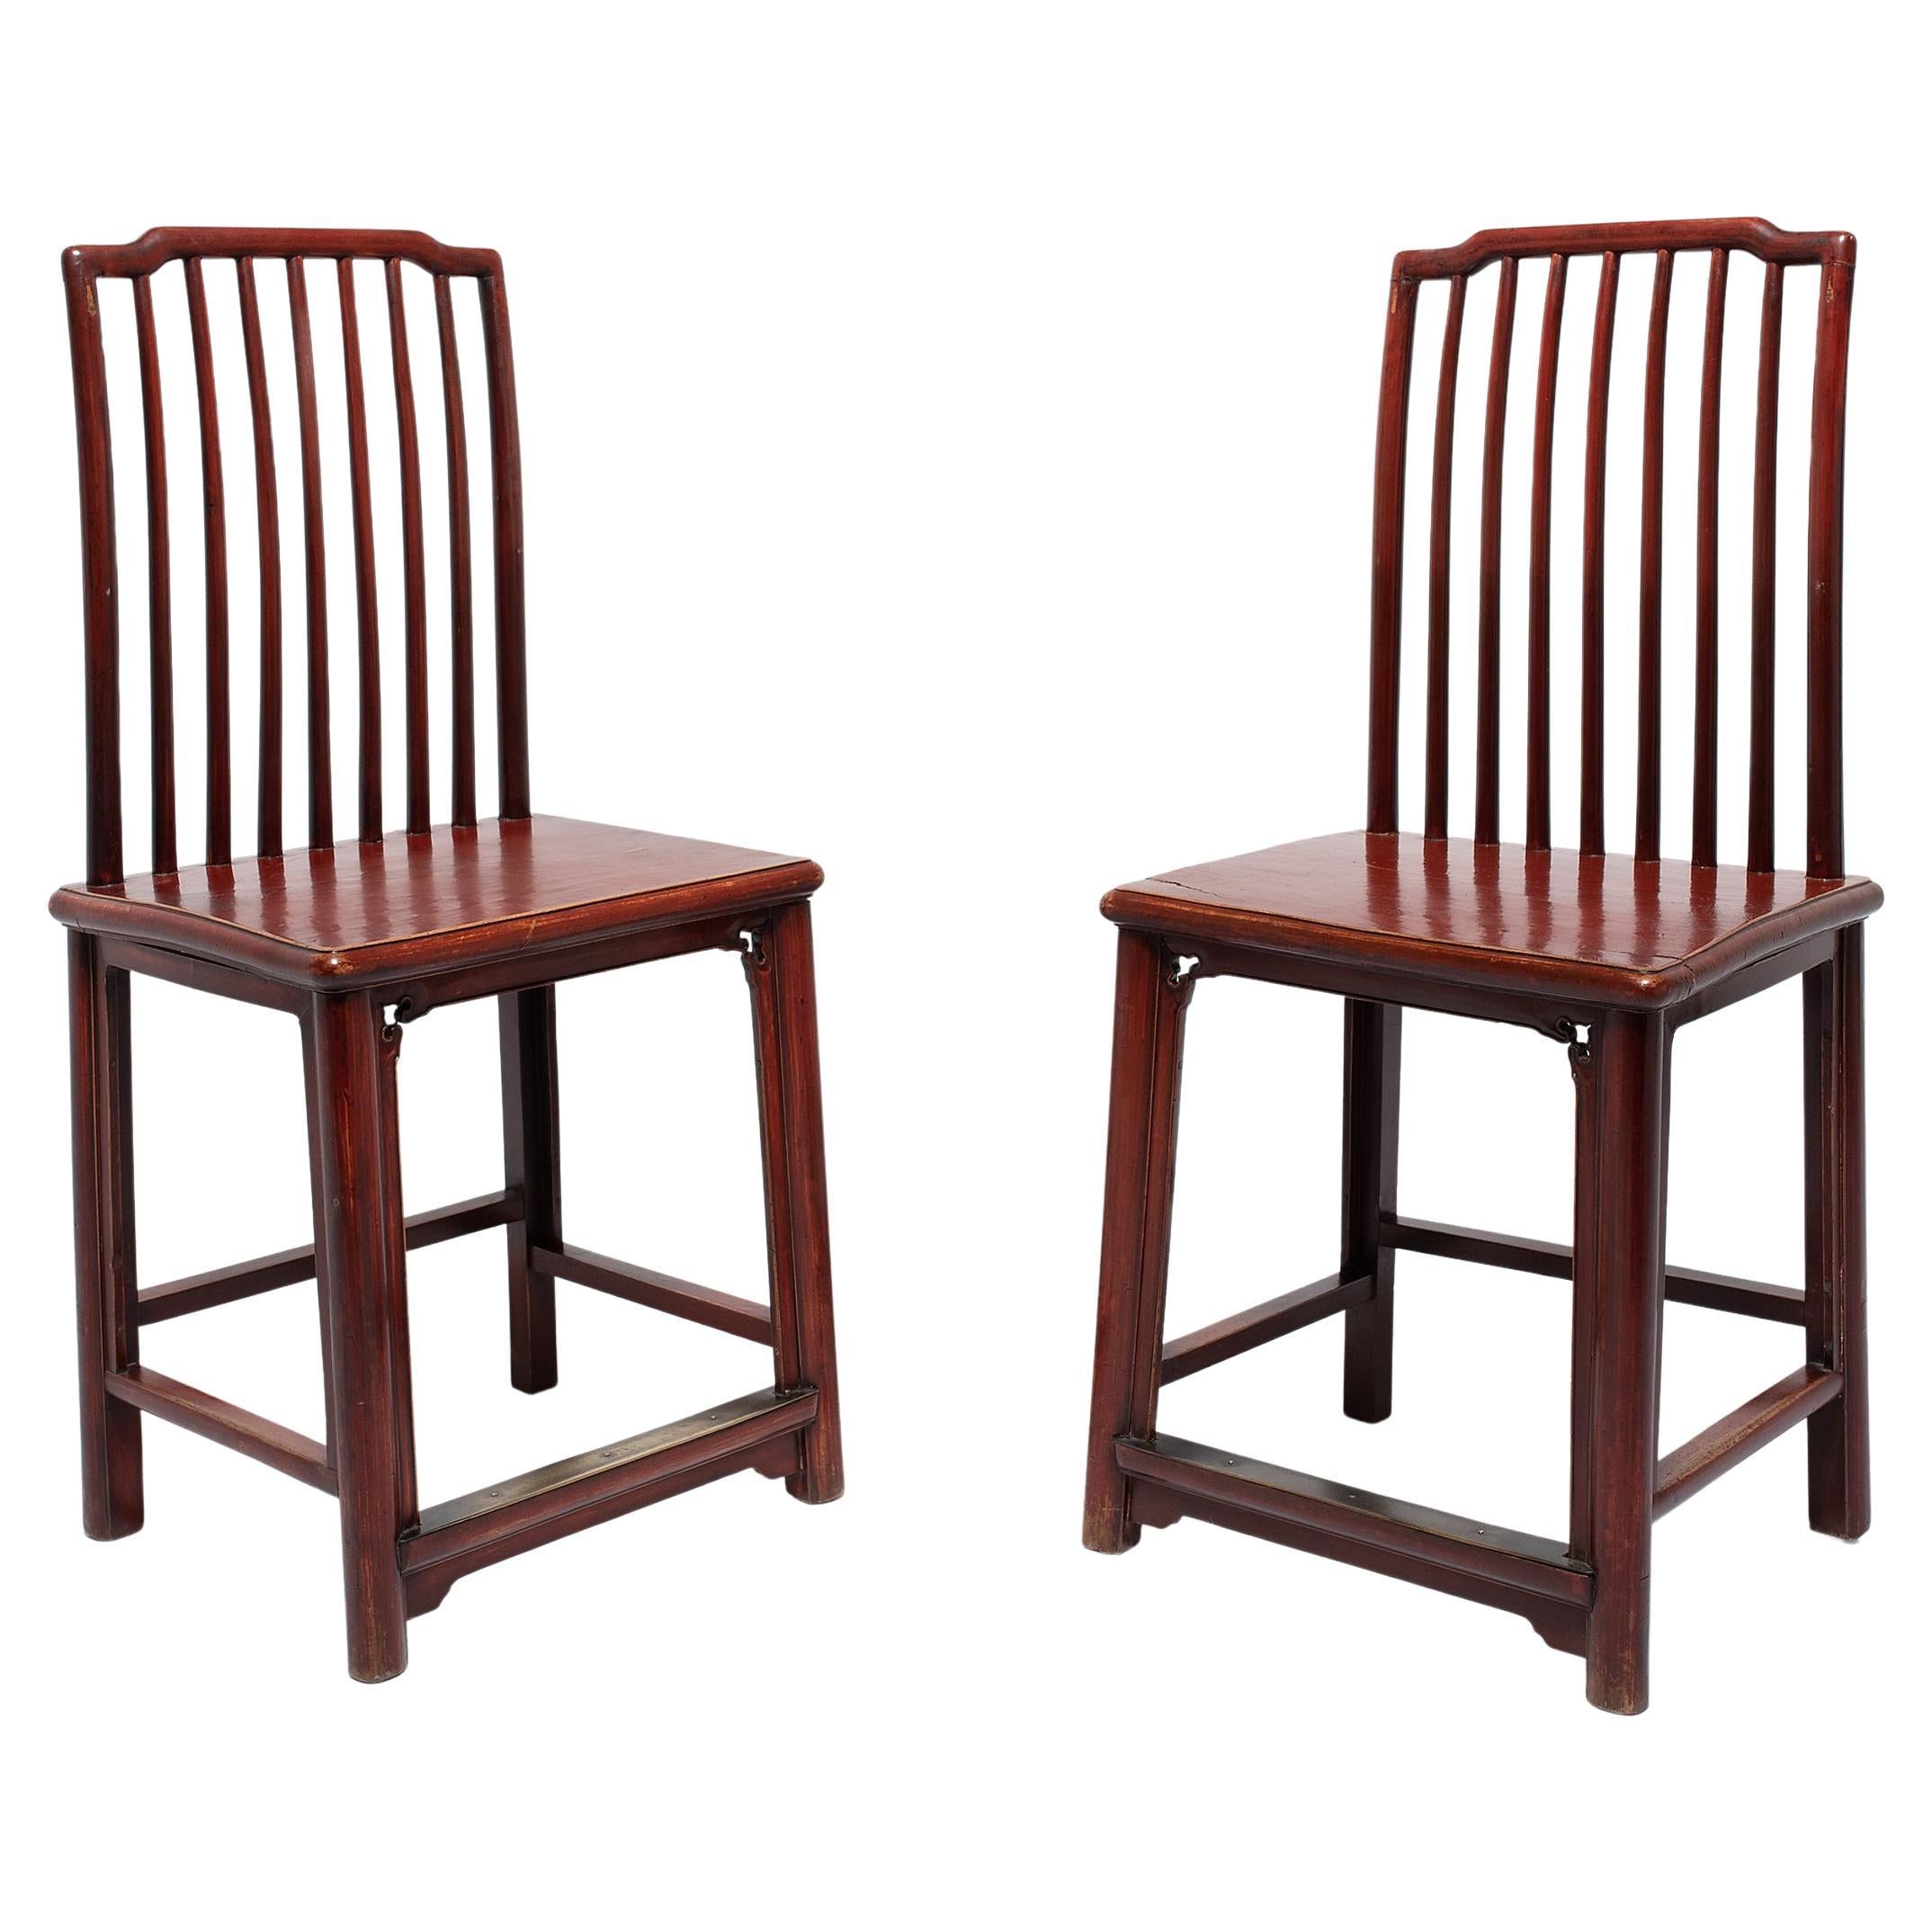 Pair of Chinese Spindleback Side Chairs, c. 1850 For Sale